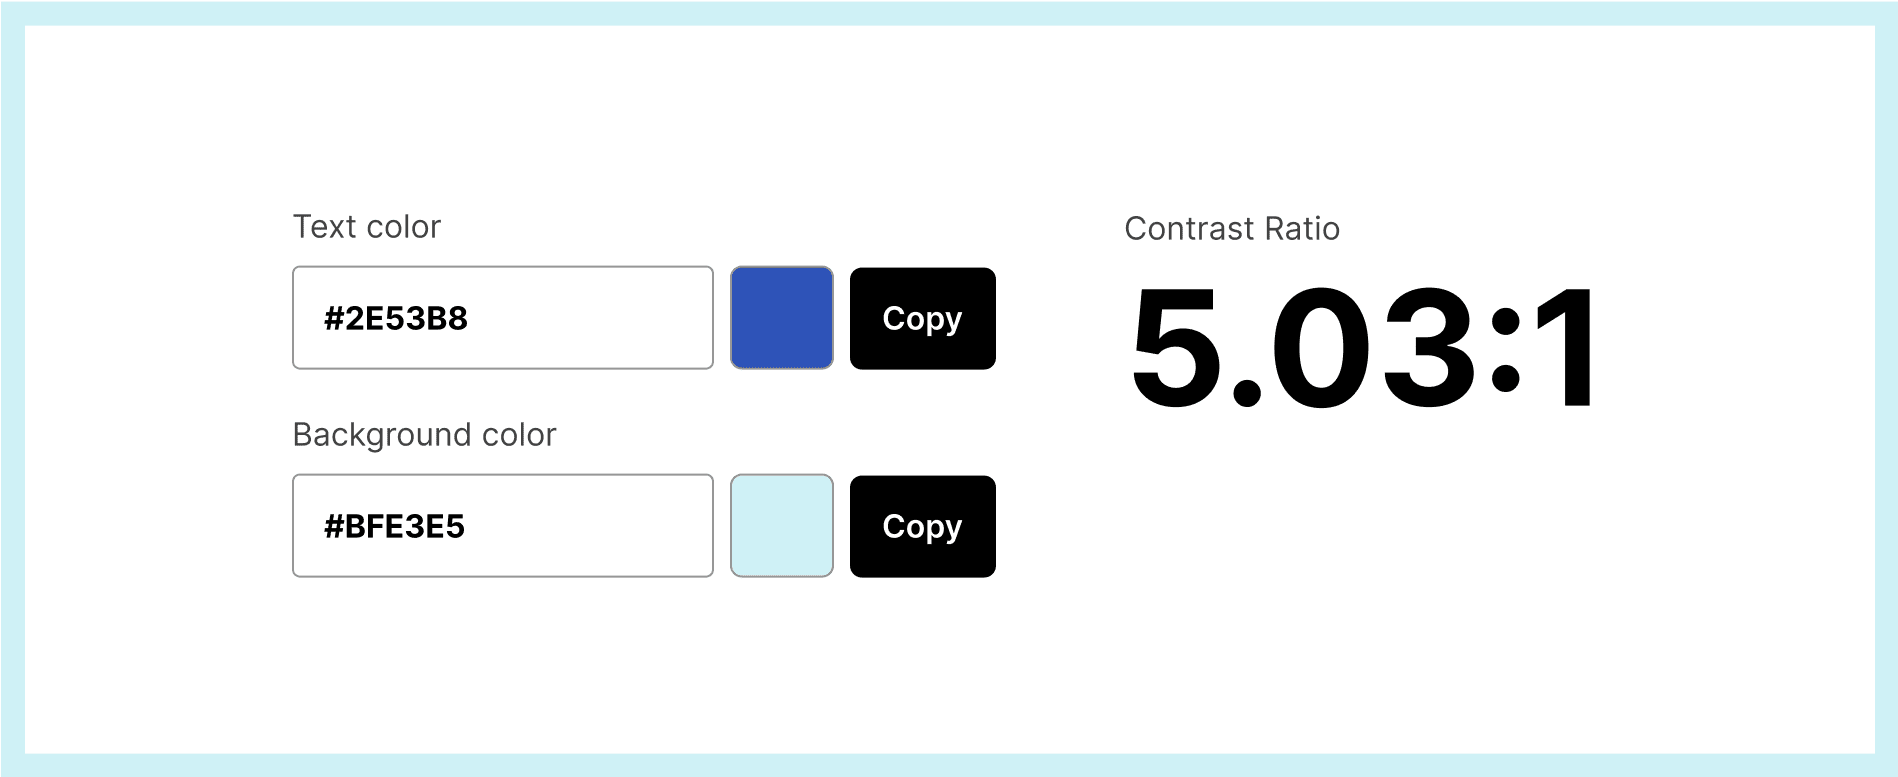 Visualization of a color contrast checker, showing a contrast ratio of 5:1 for two shades of blue